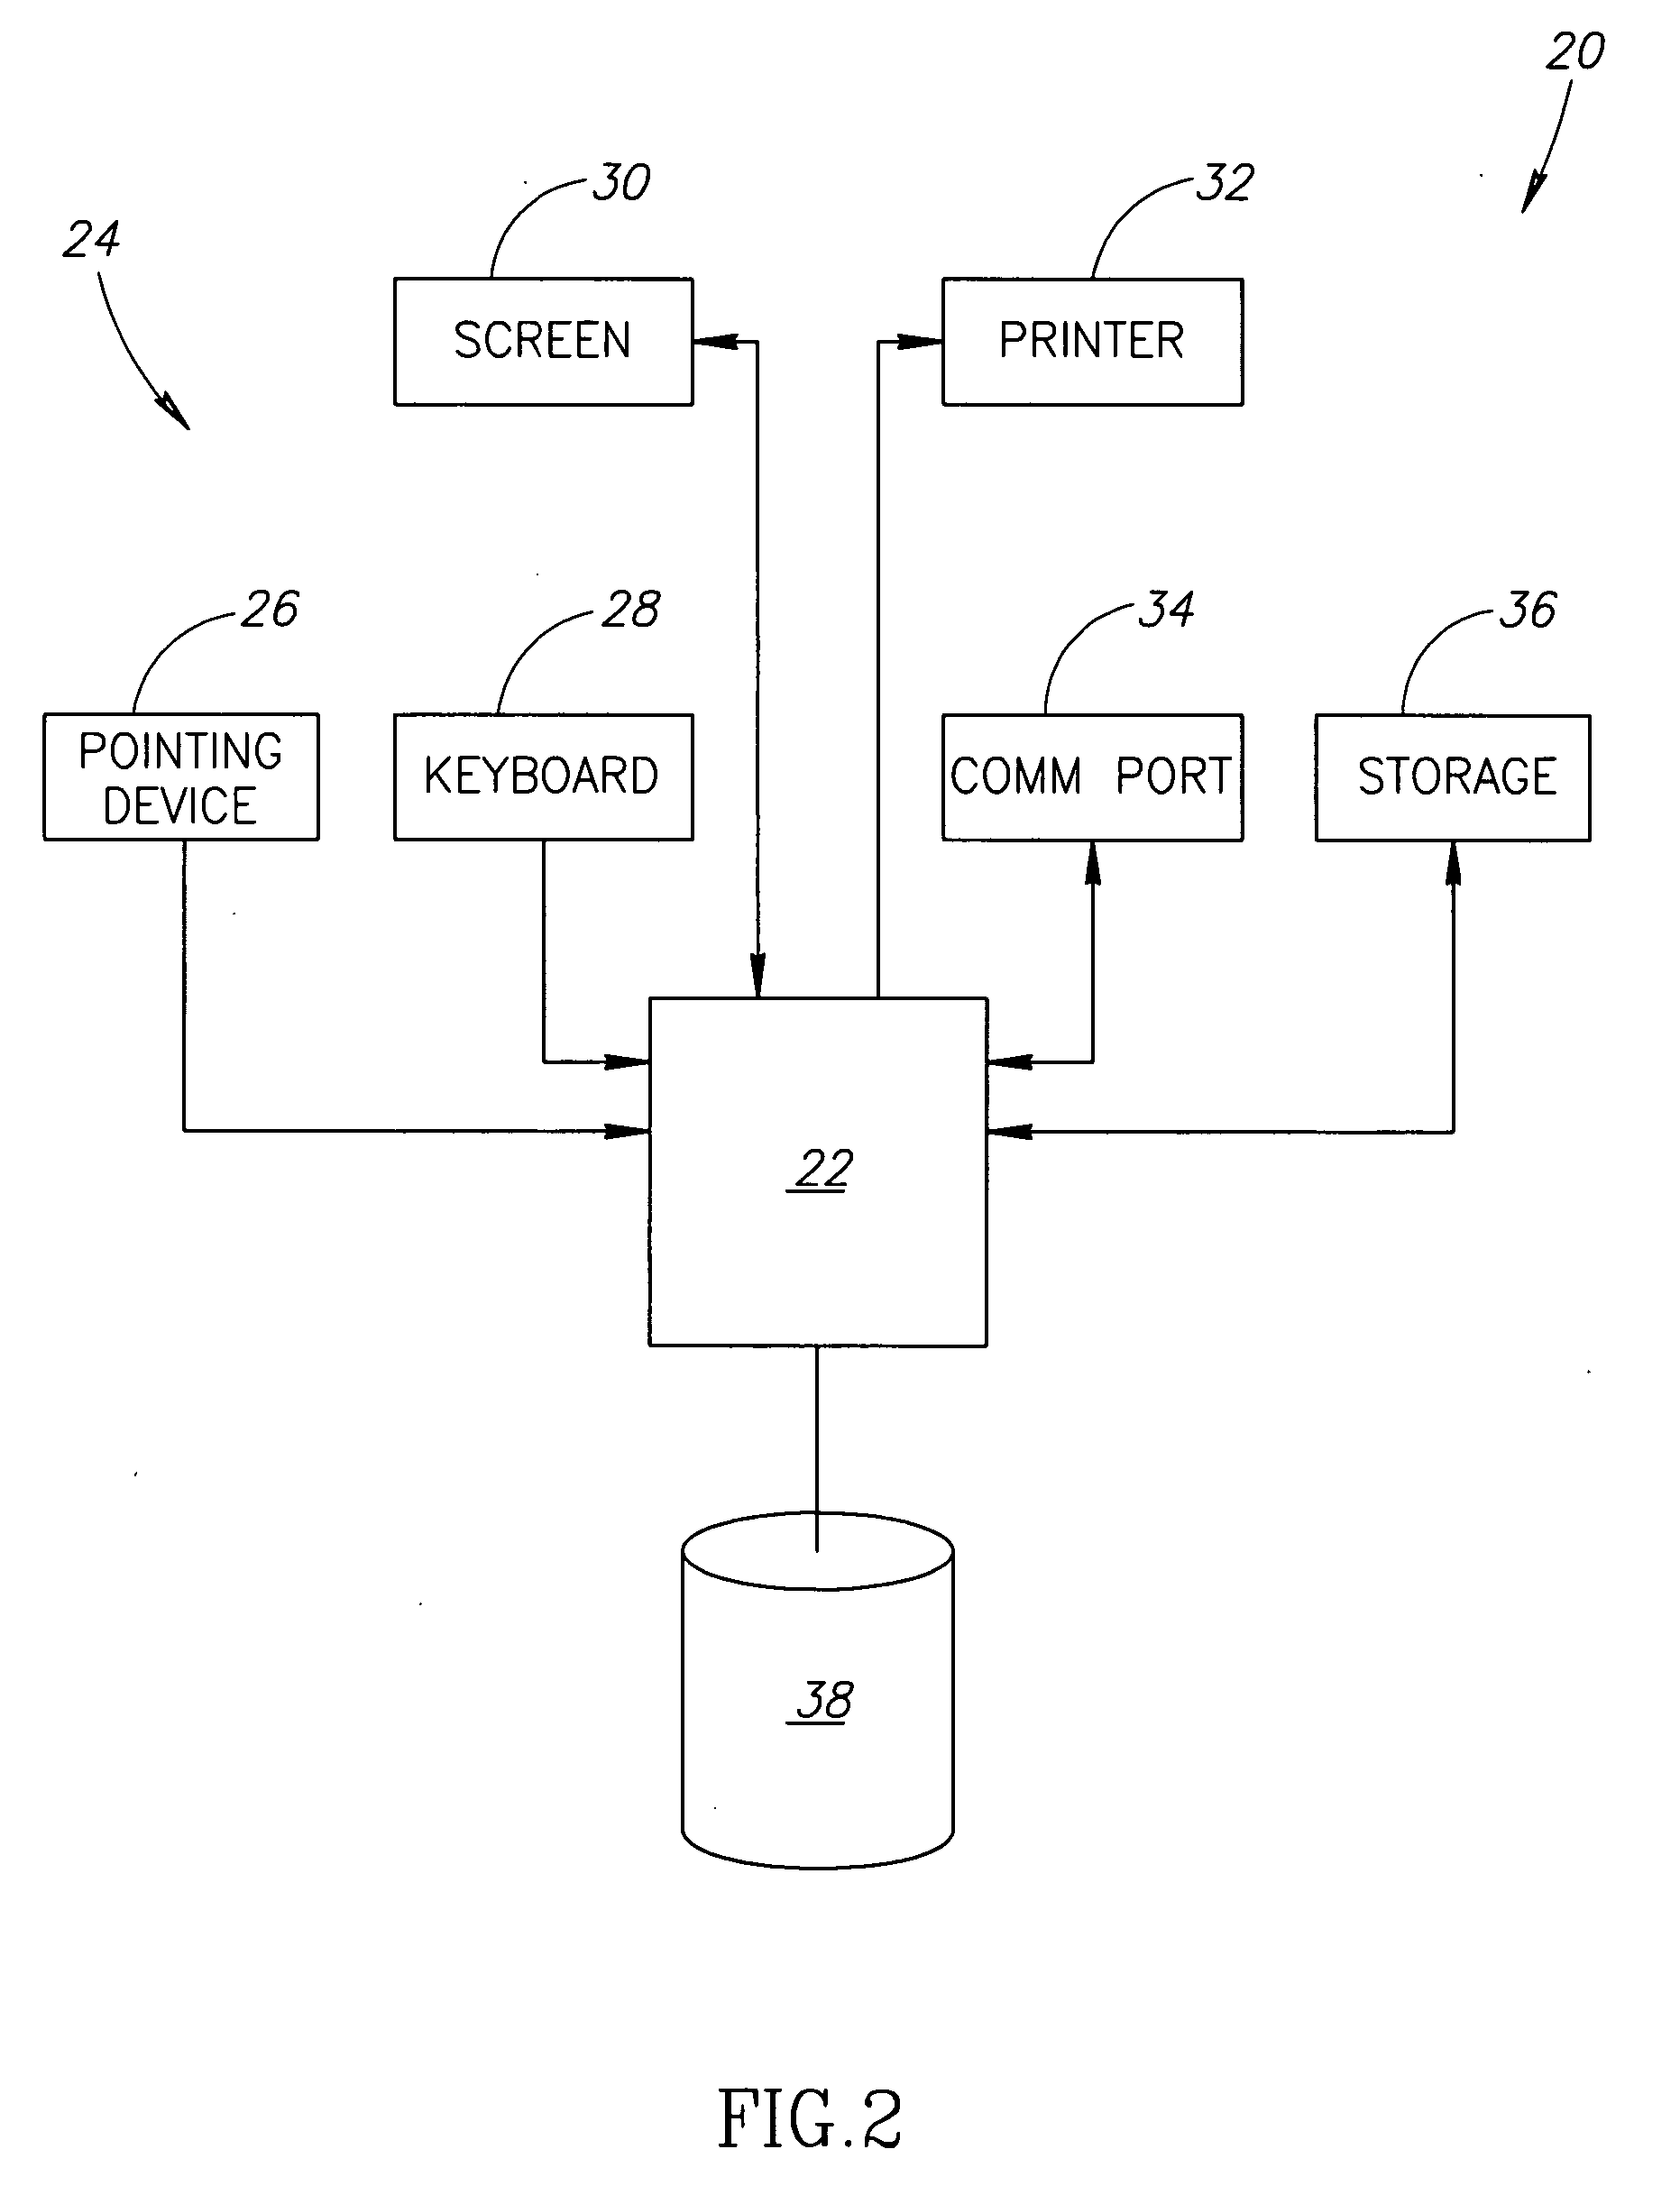 Integrated document directory generator apparatus and methods